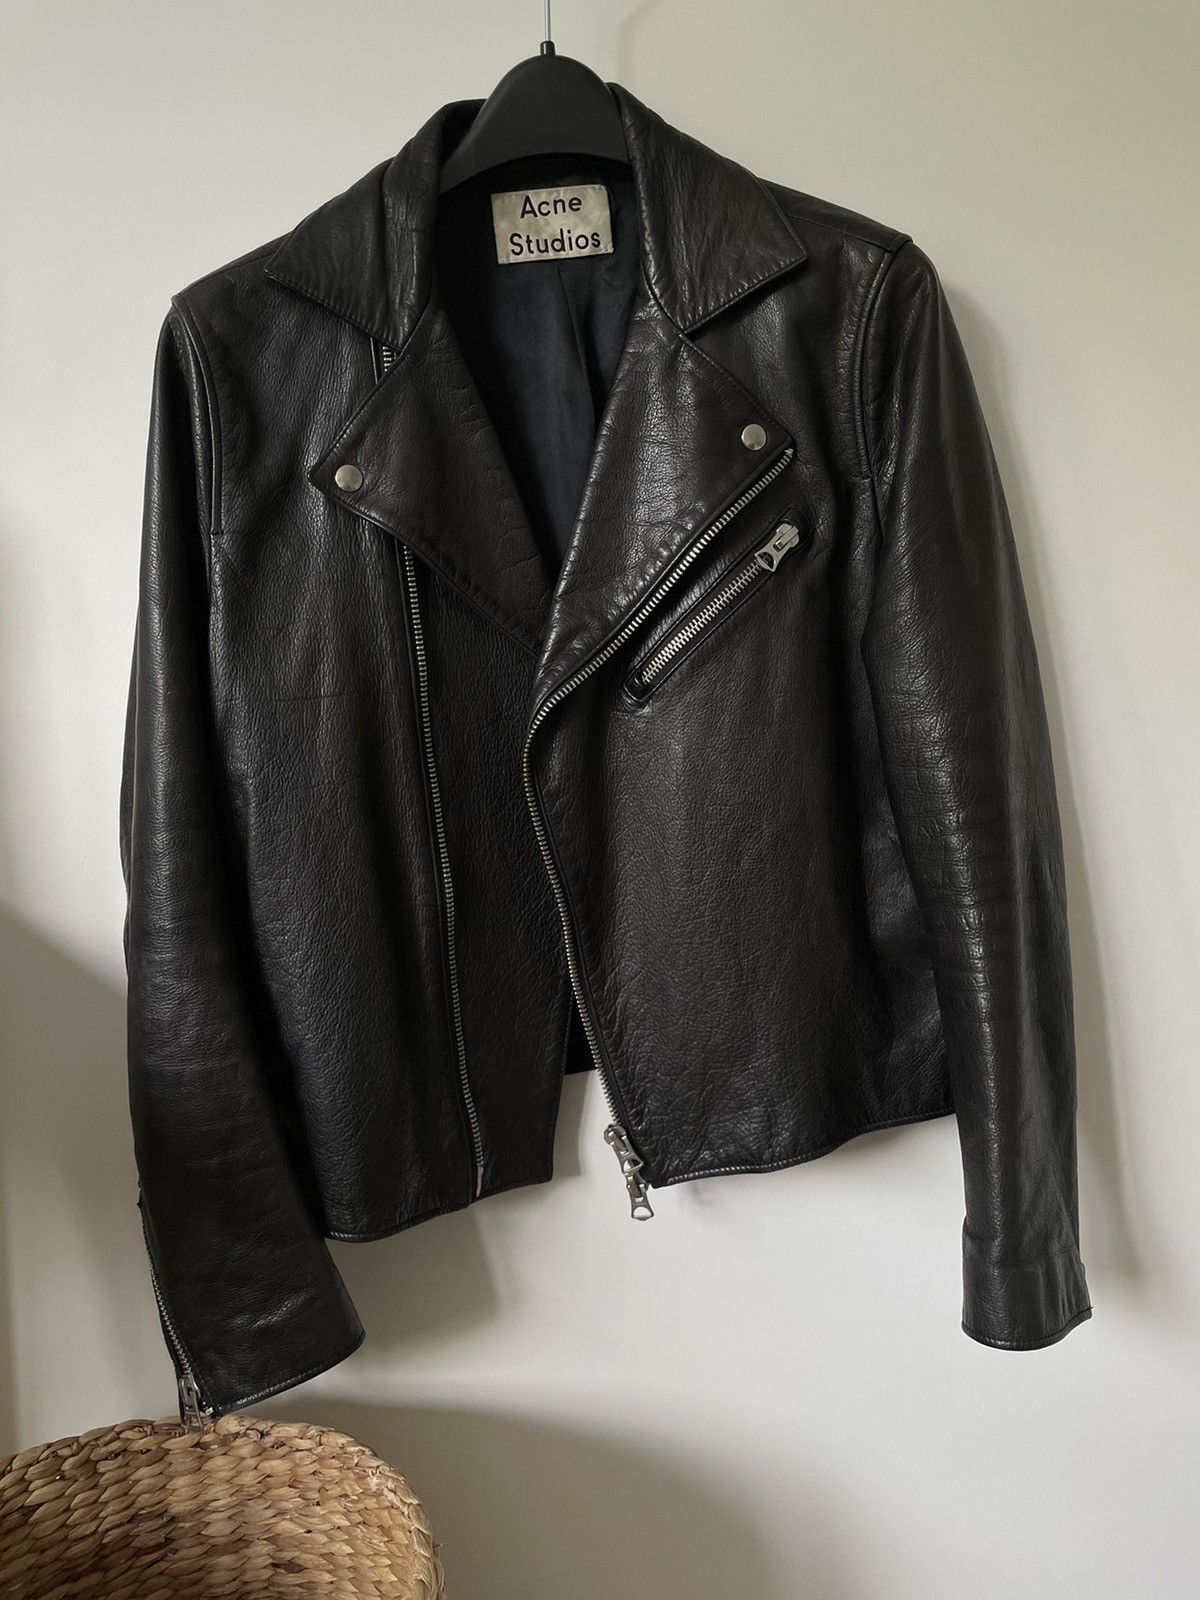 Acne Studios Gibson Leather Jacket | Grailed